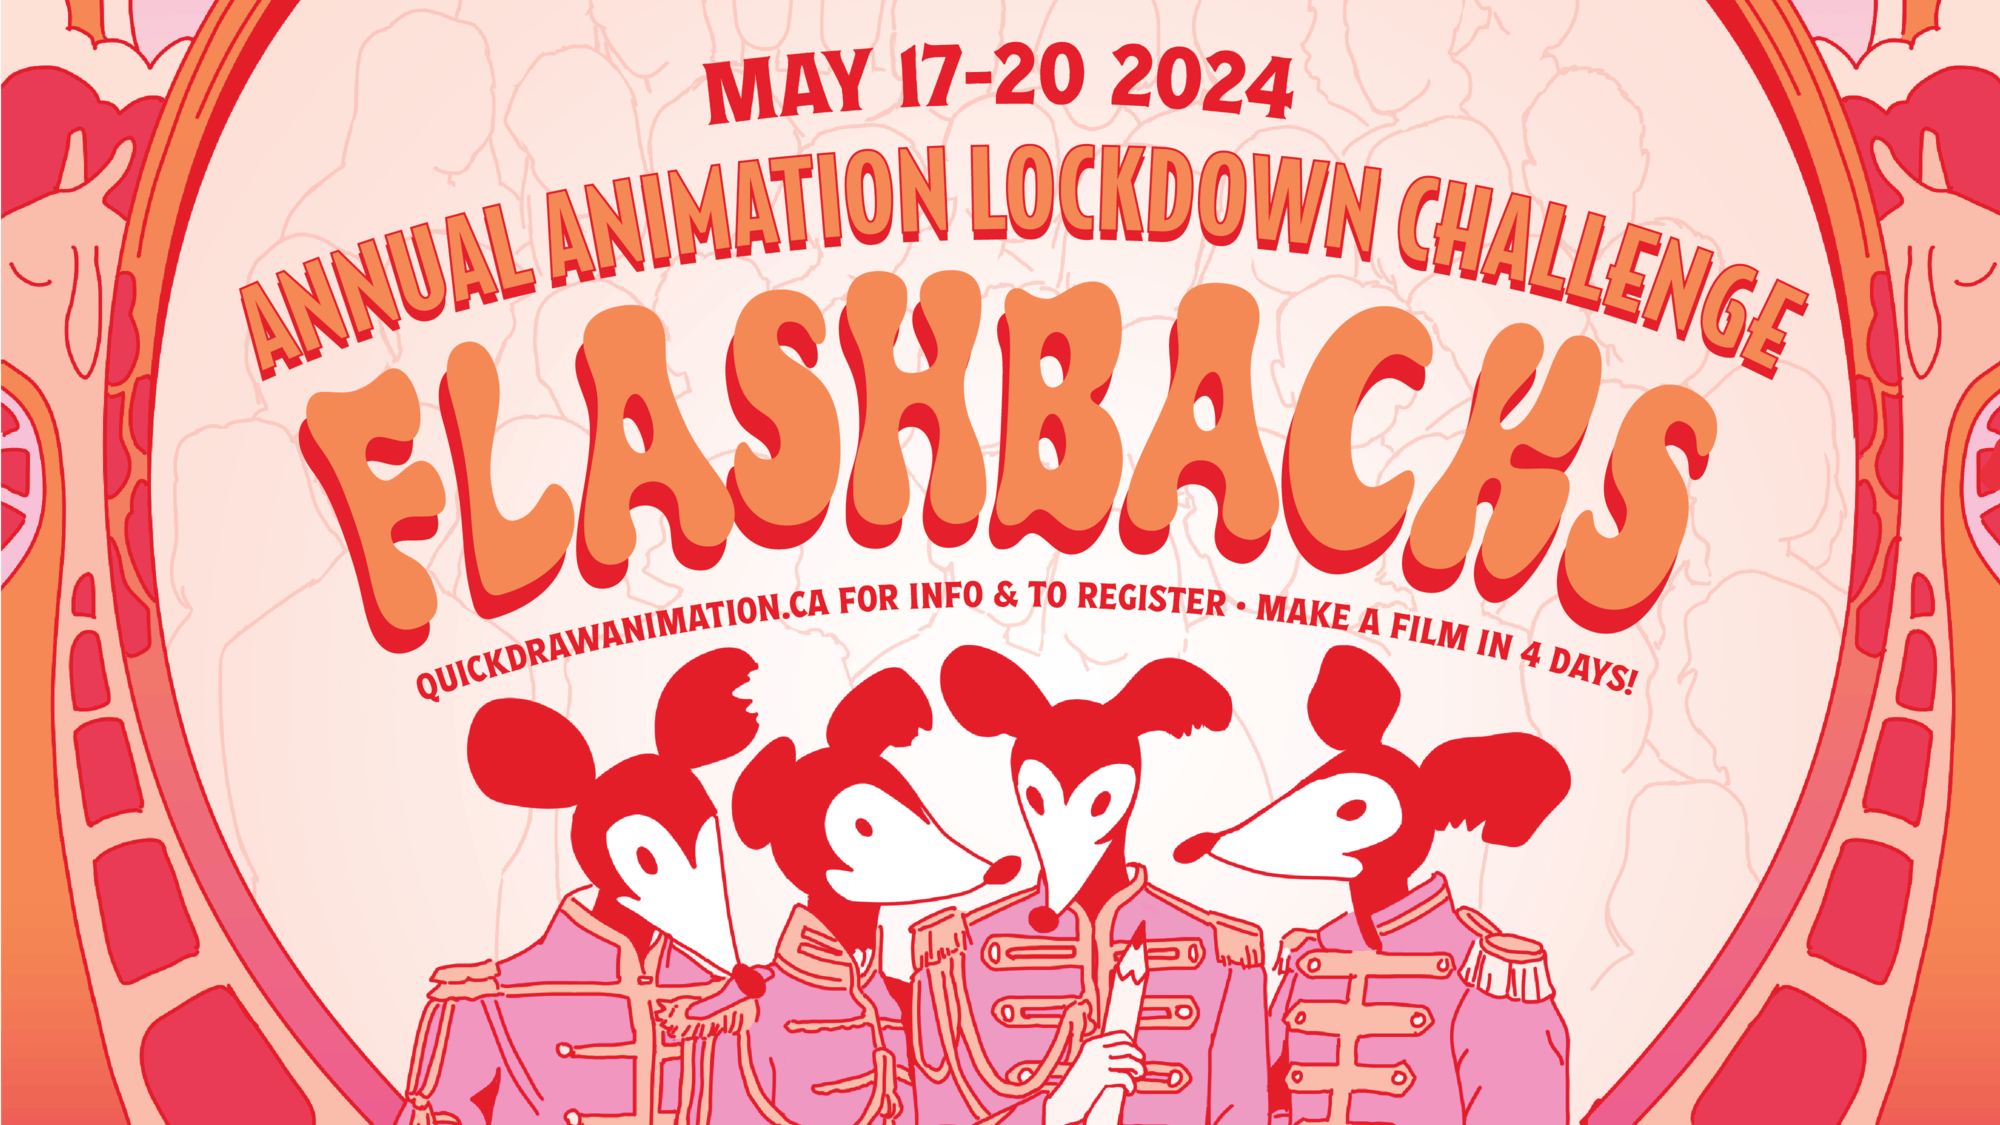 1920x1080 version of the 2024 lockdown poster, text reads "MAY 17-20, 2024
ANNUAL ANIMATION LOCKDOWN CHALLENGE

FLASHBACKS

QUICKDRAWANIMATION.CA FOR INFO & TO REGISTER - MAKE A FILM IN 4 DAYS!" 

Four Hamish's in suits with a border of giraffes in a St. Pepper Lonely Hearts Club Band style with pinks, reds and oranges. 